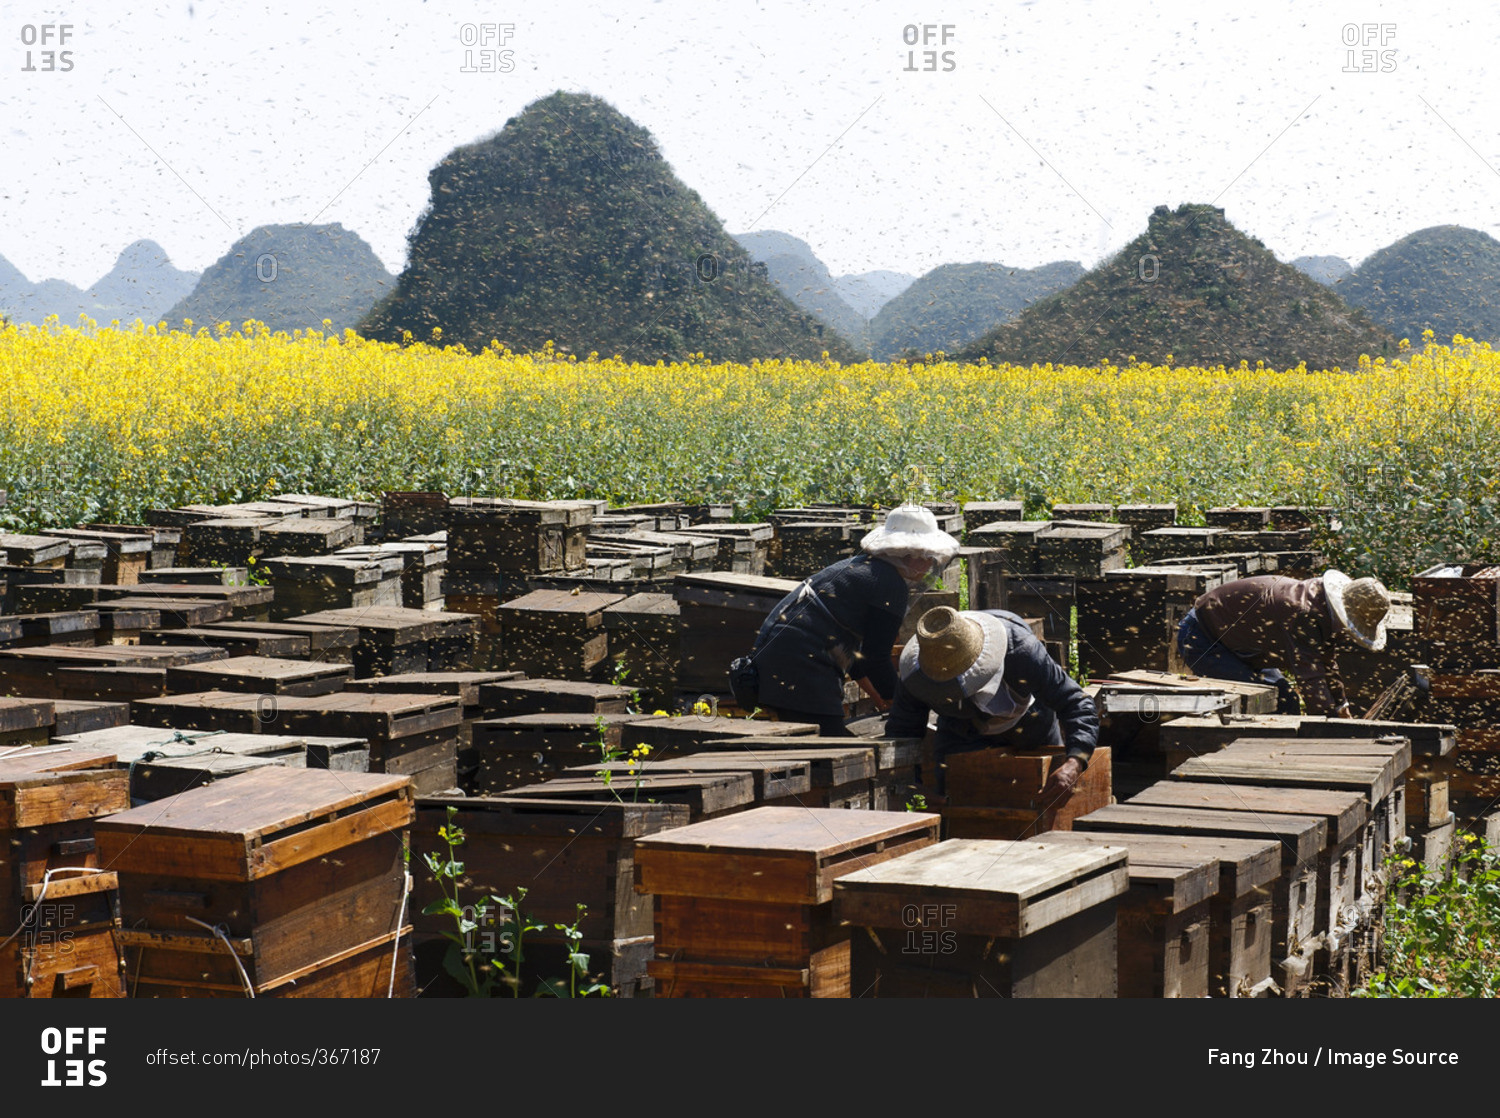 Swarms of bees and three beekeepers working next to fields with yellow blooming oil seed rape plants, Luoping, Yunnan, China